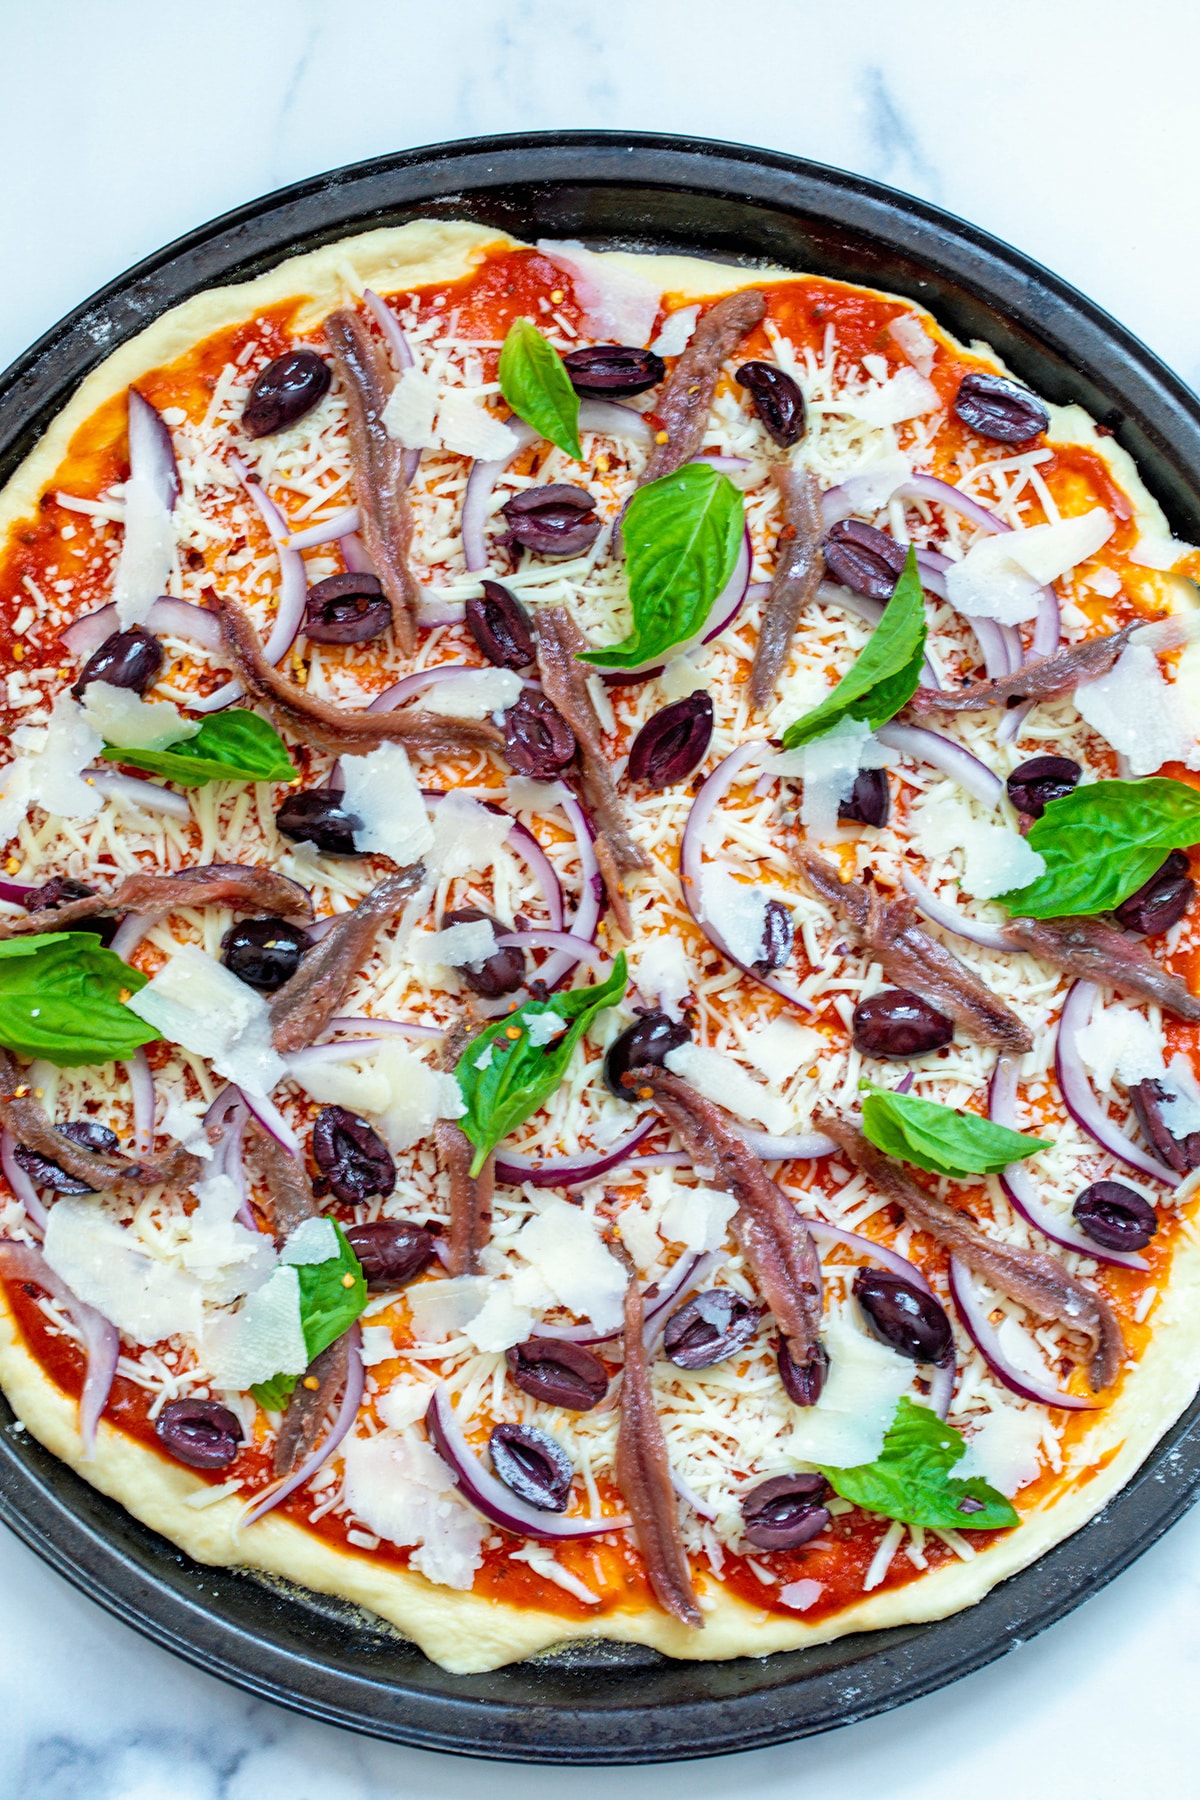 Pizza dough spread out on pan with tomato sauce, shredded cheese, shaved parmesan, anchovies, olives, red onion, and basil leaves.